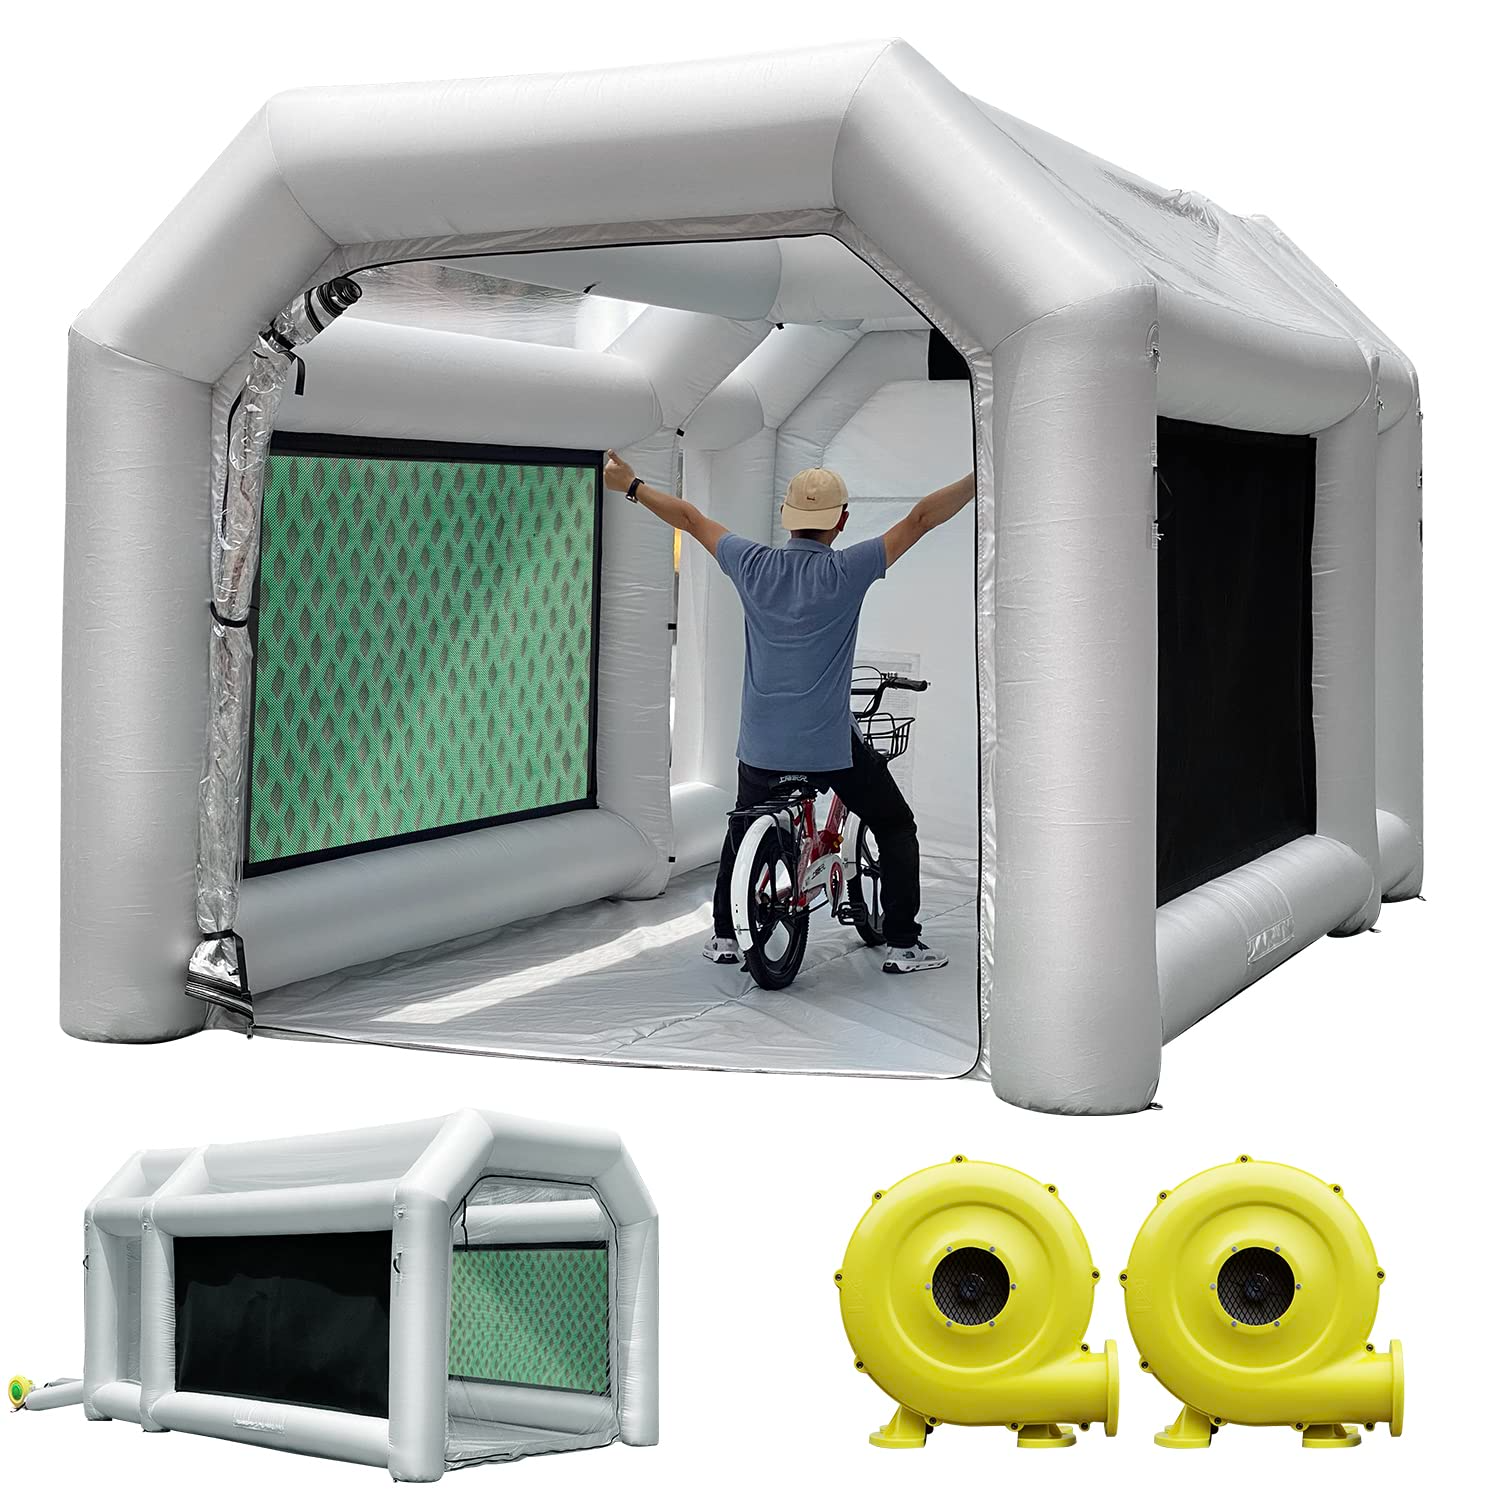 iucui Portable Inflatable Paint Booth 30X20X13Ft with Blowers